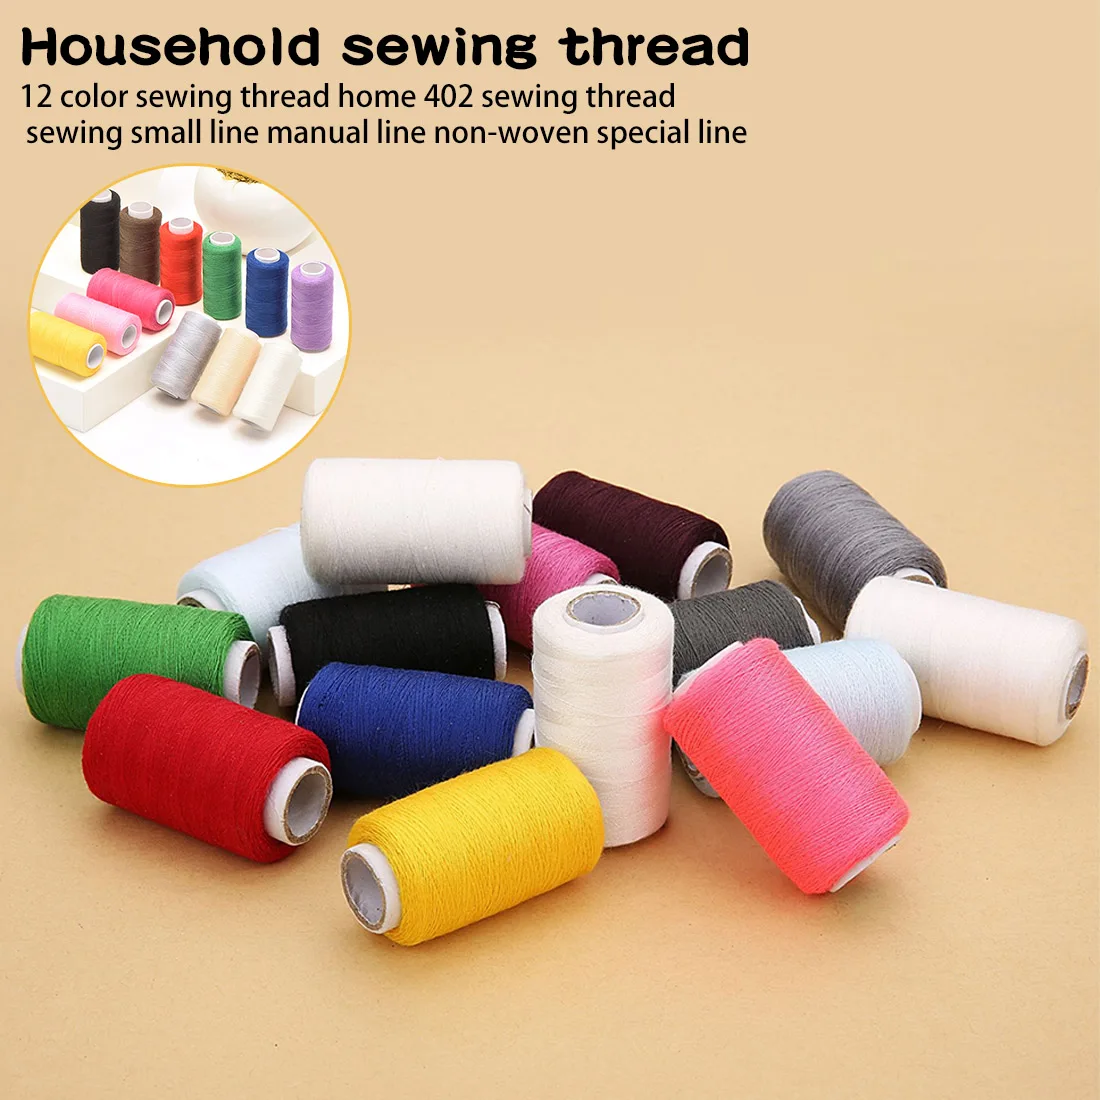 

12-color sewing thread reel for hand embroidery 200 yards household sewing kit per spool Household sewing thread hot sale